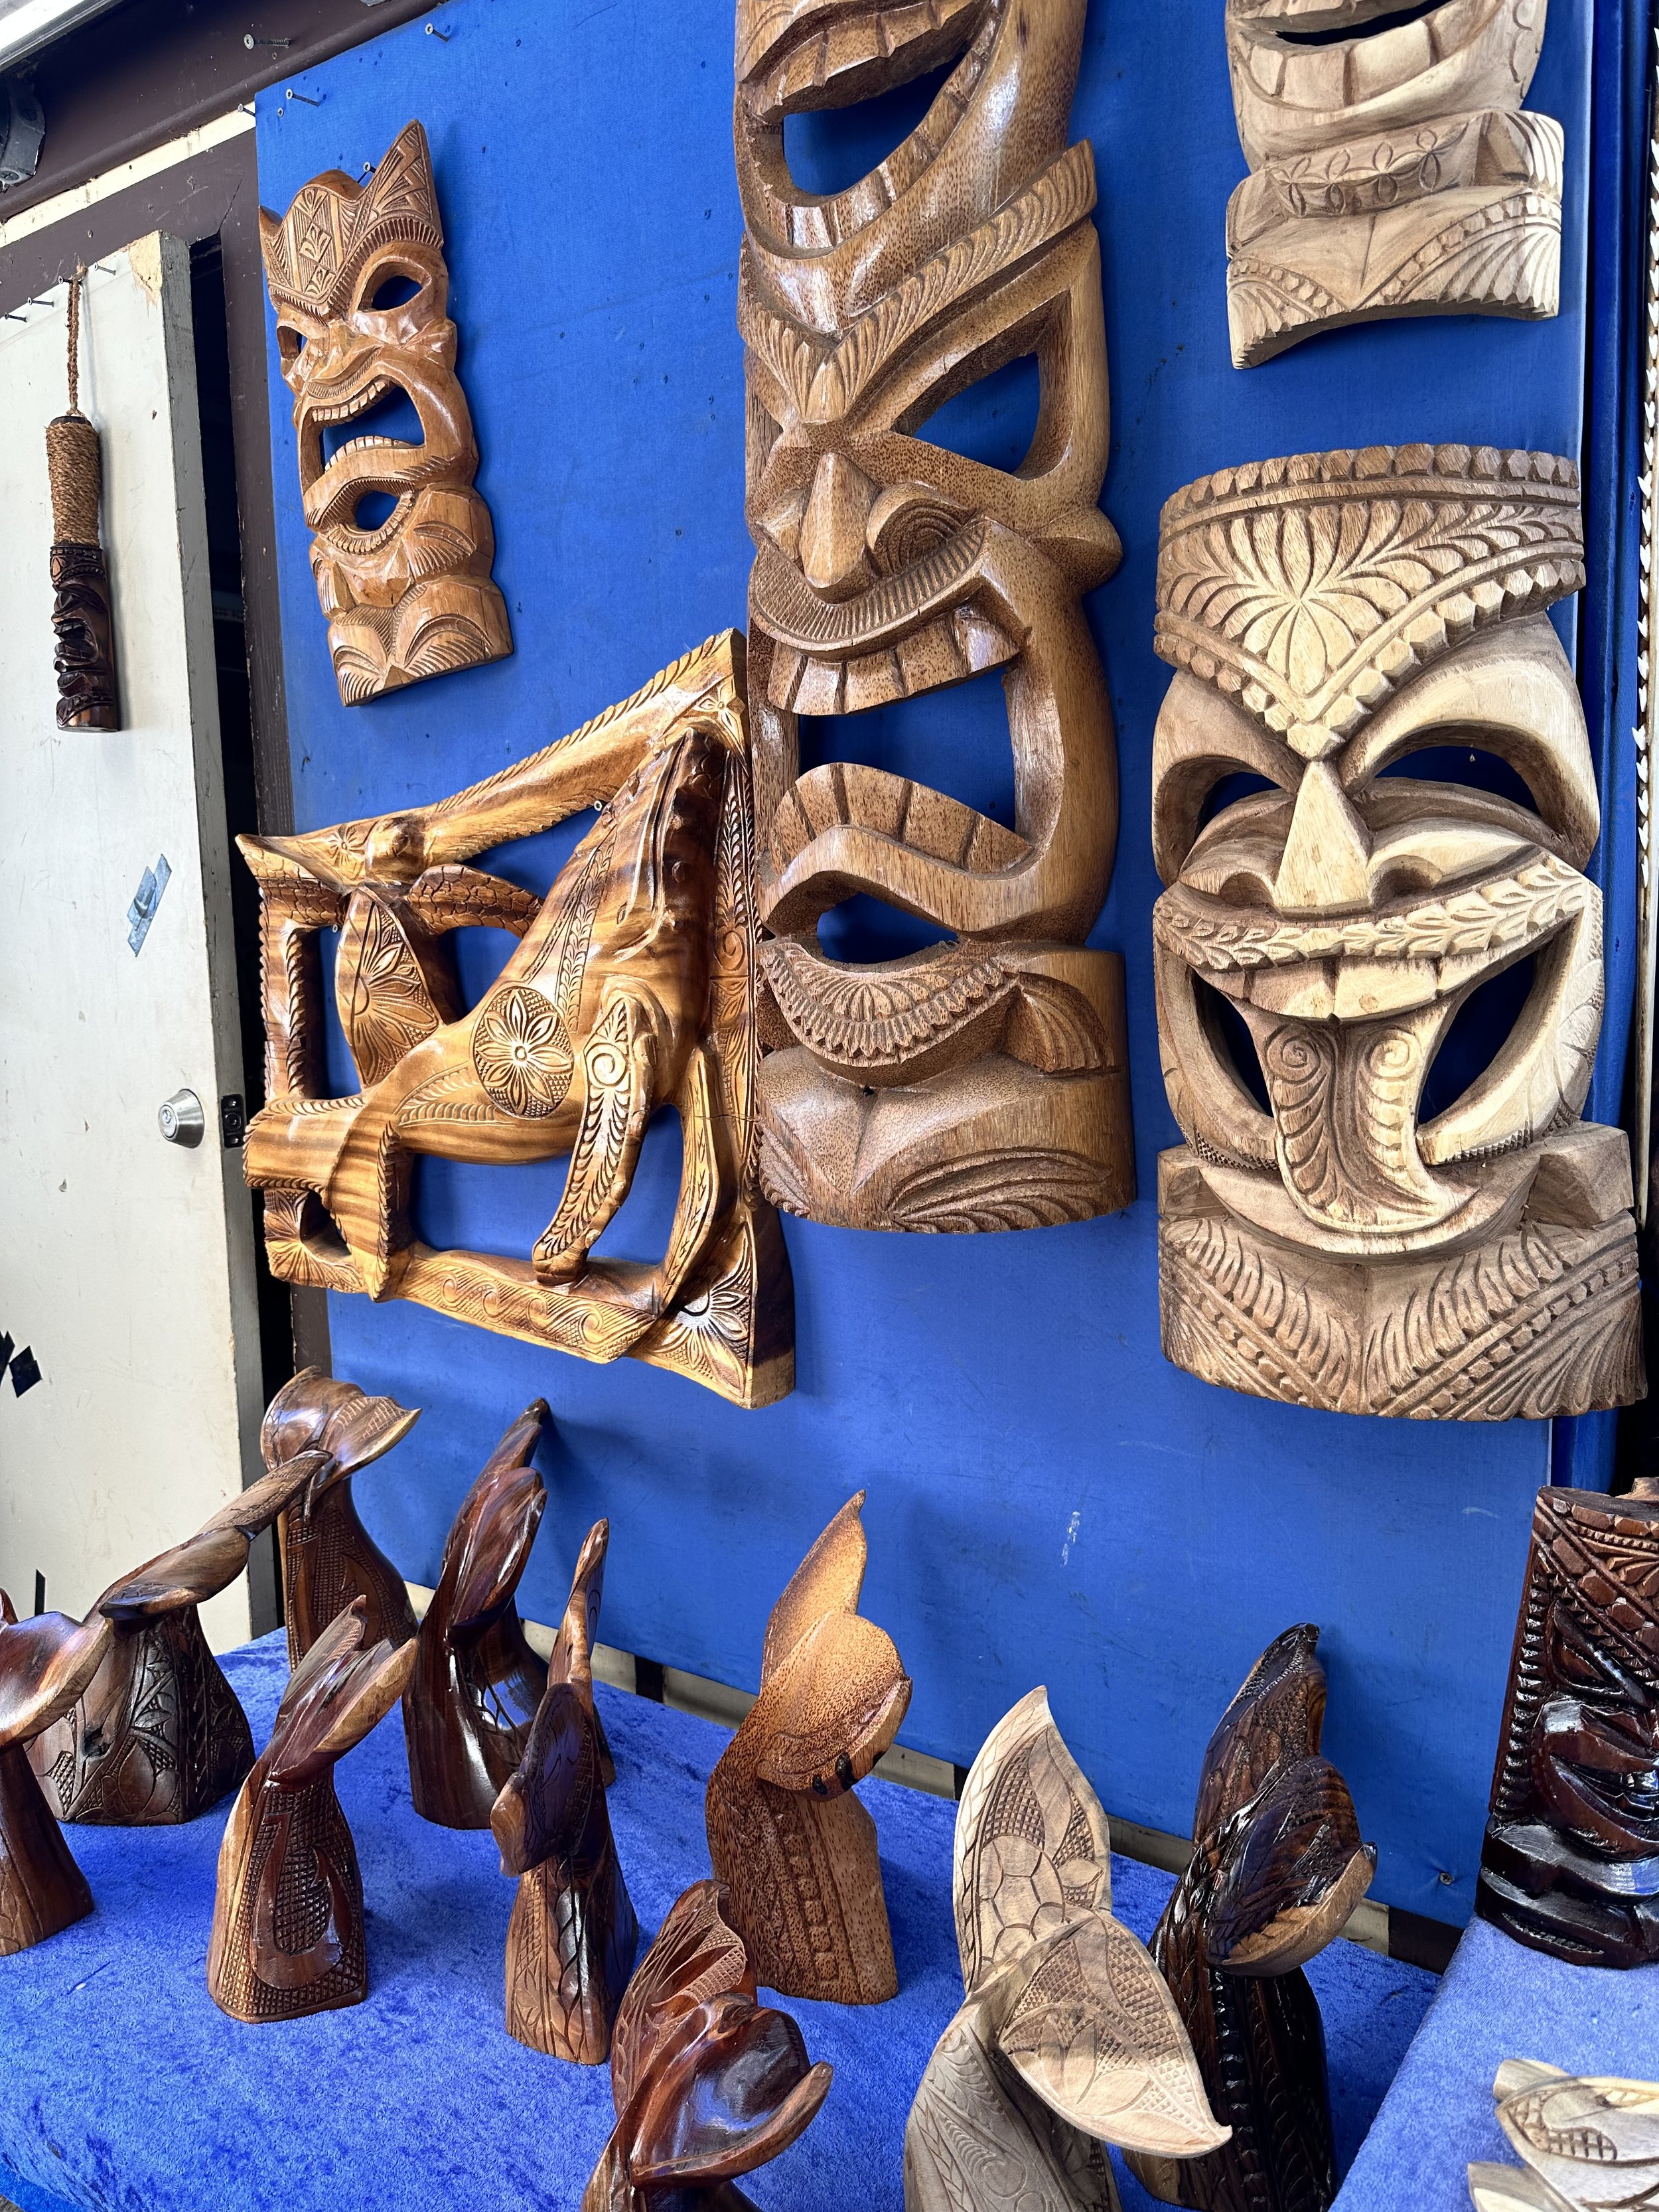 Hand made items in Downtown Lahaina